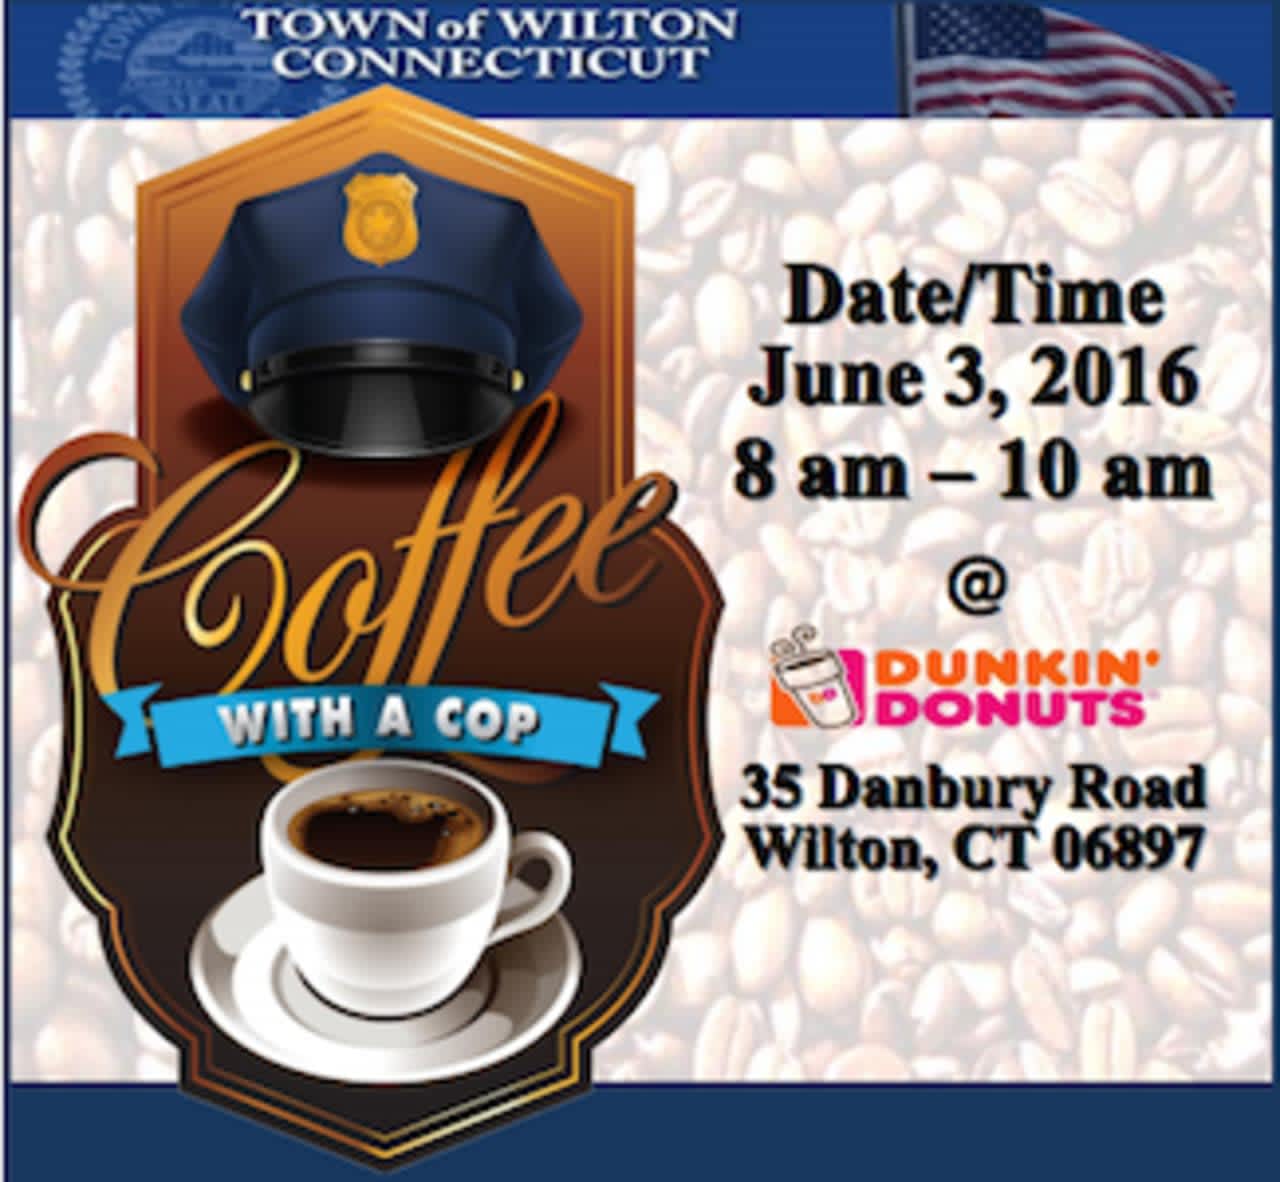 Wilton Police Department to host Coffee with a Cop on Friday, June 3 at the Dunkin' Donuts on Danbury Road.